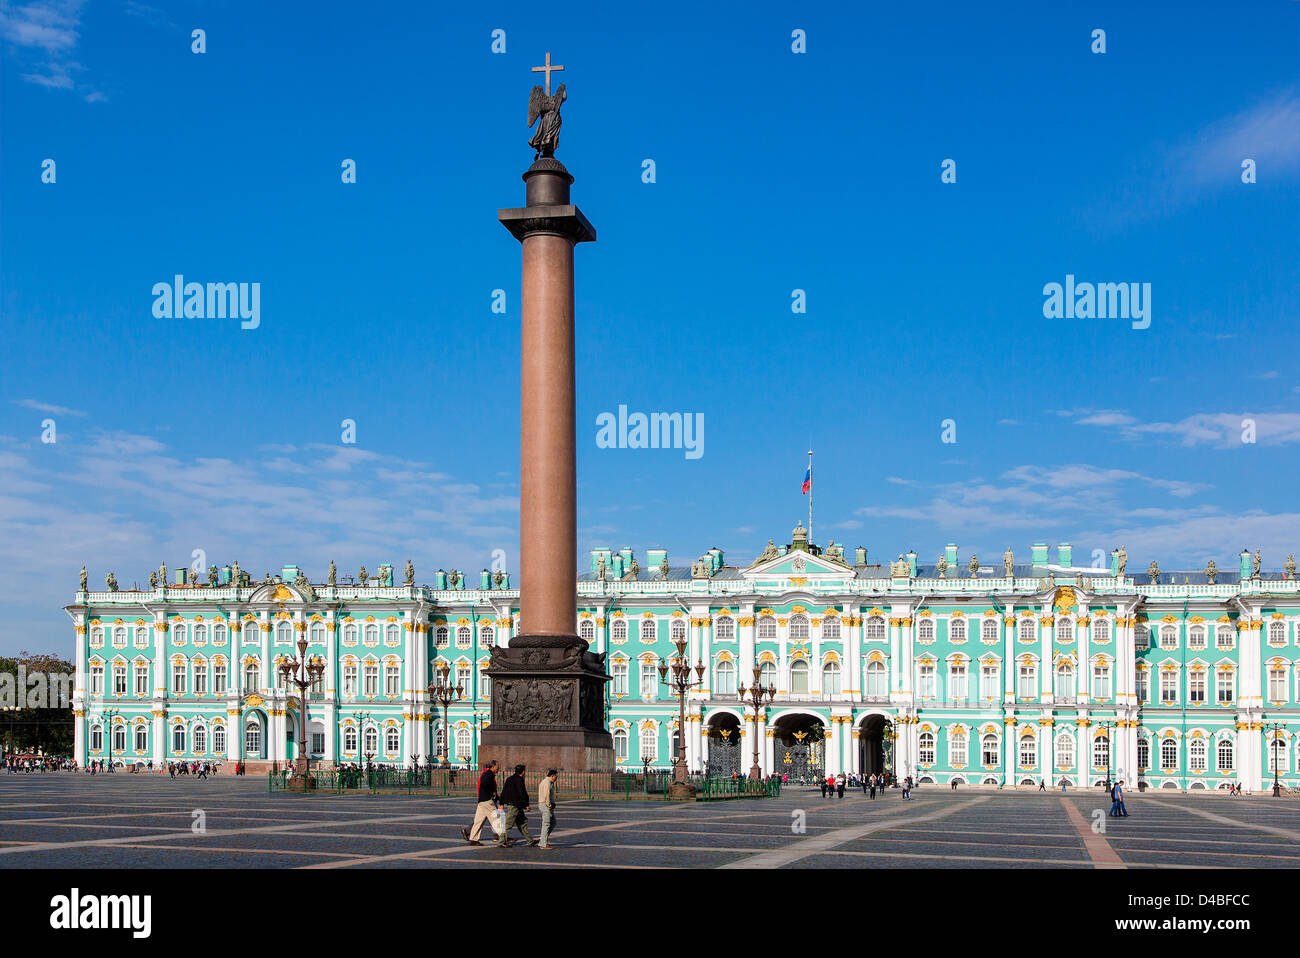 St. Petersburg, Palace Square and the Hermitage Stock Photo